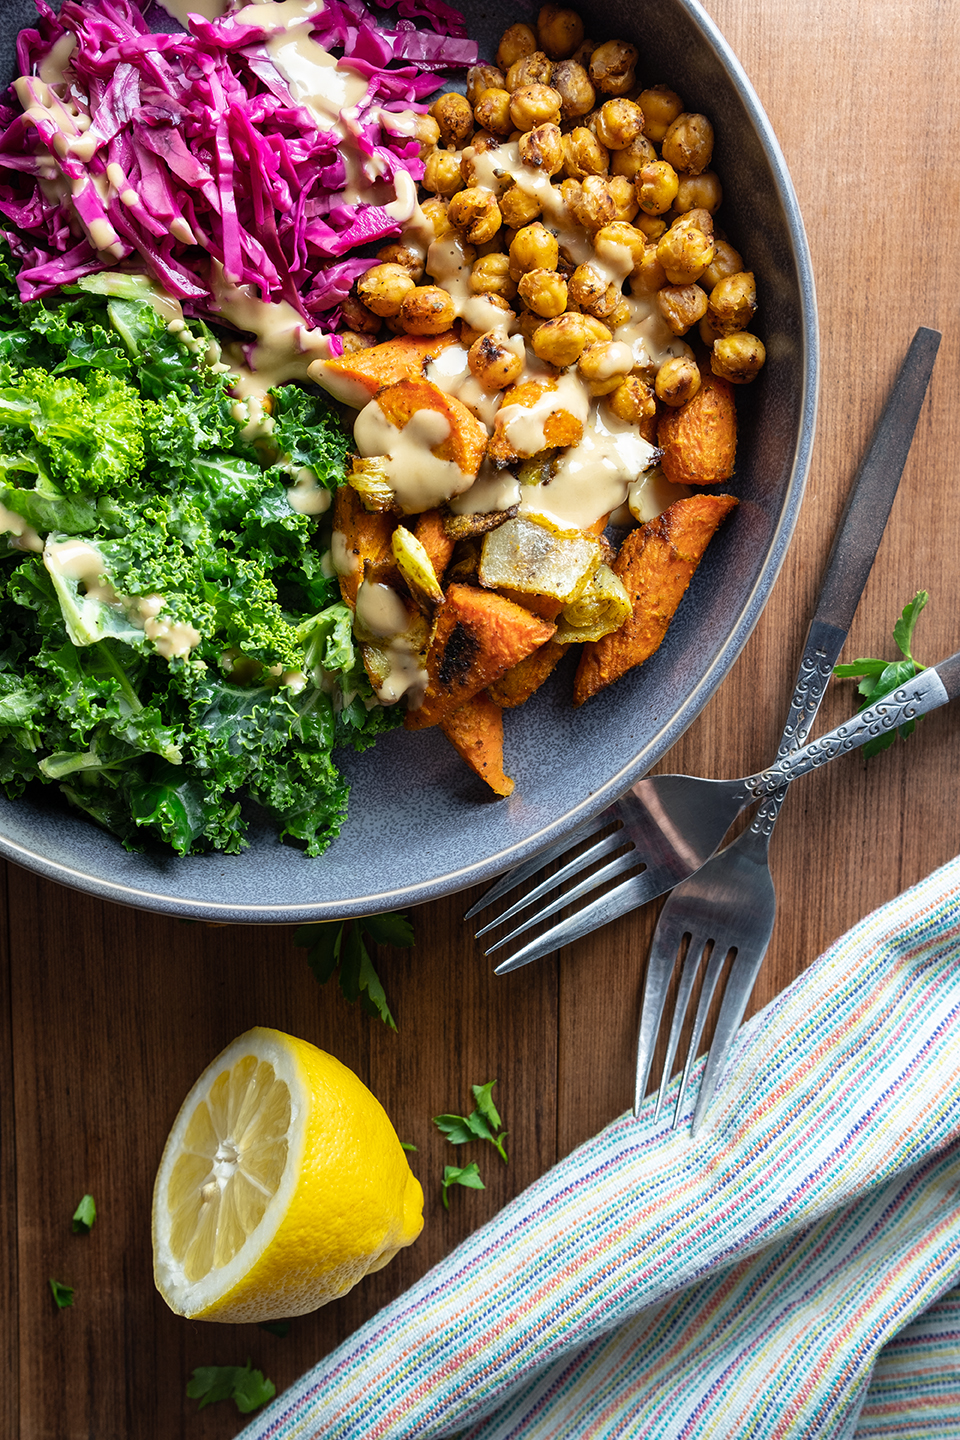  Spicy Healthy Vegetarian Buddha Bowl with a sunflower butter and lemon dressing 